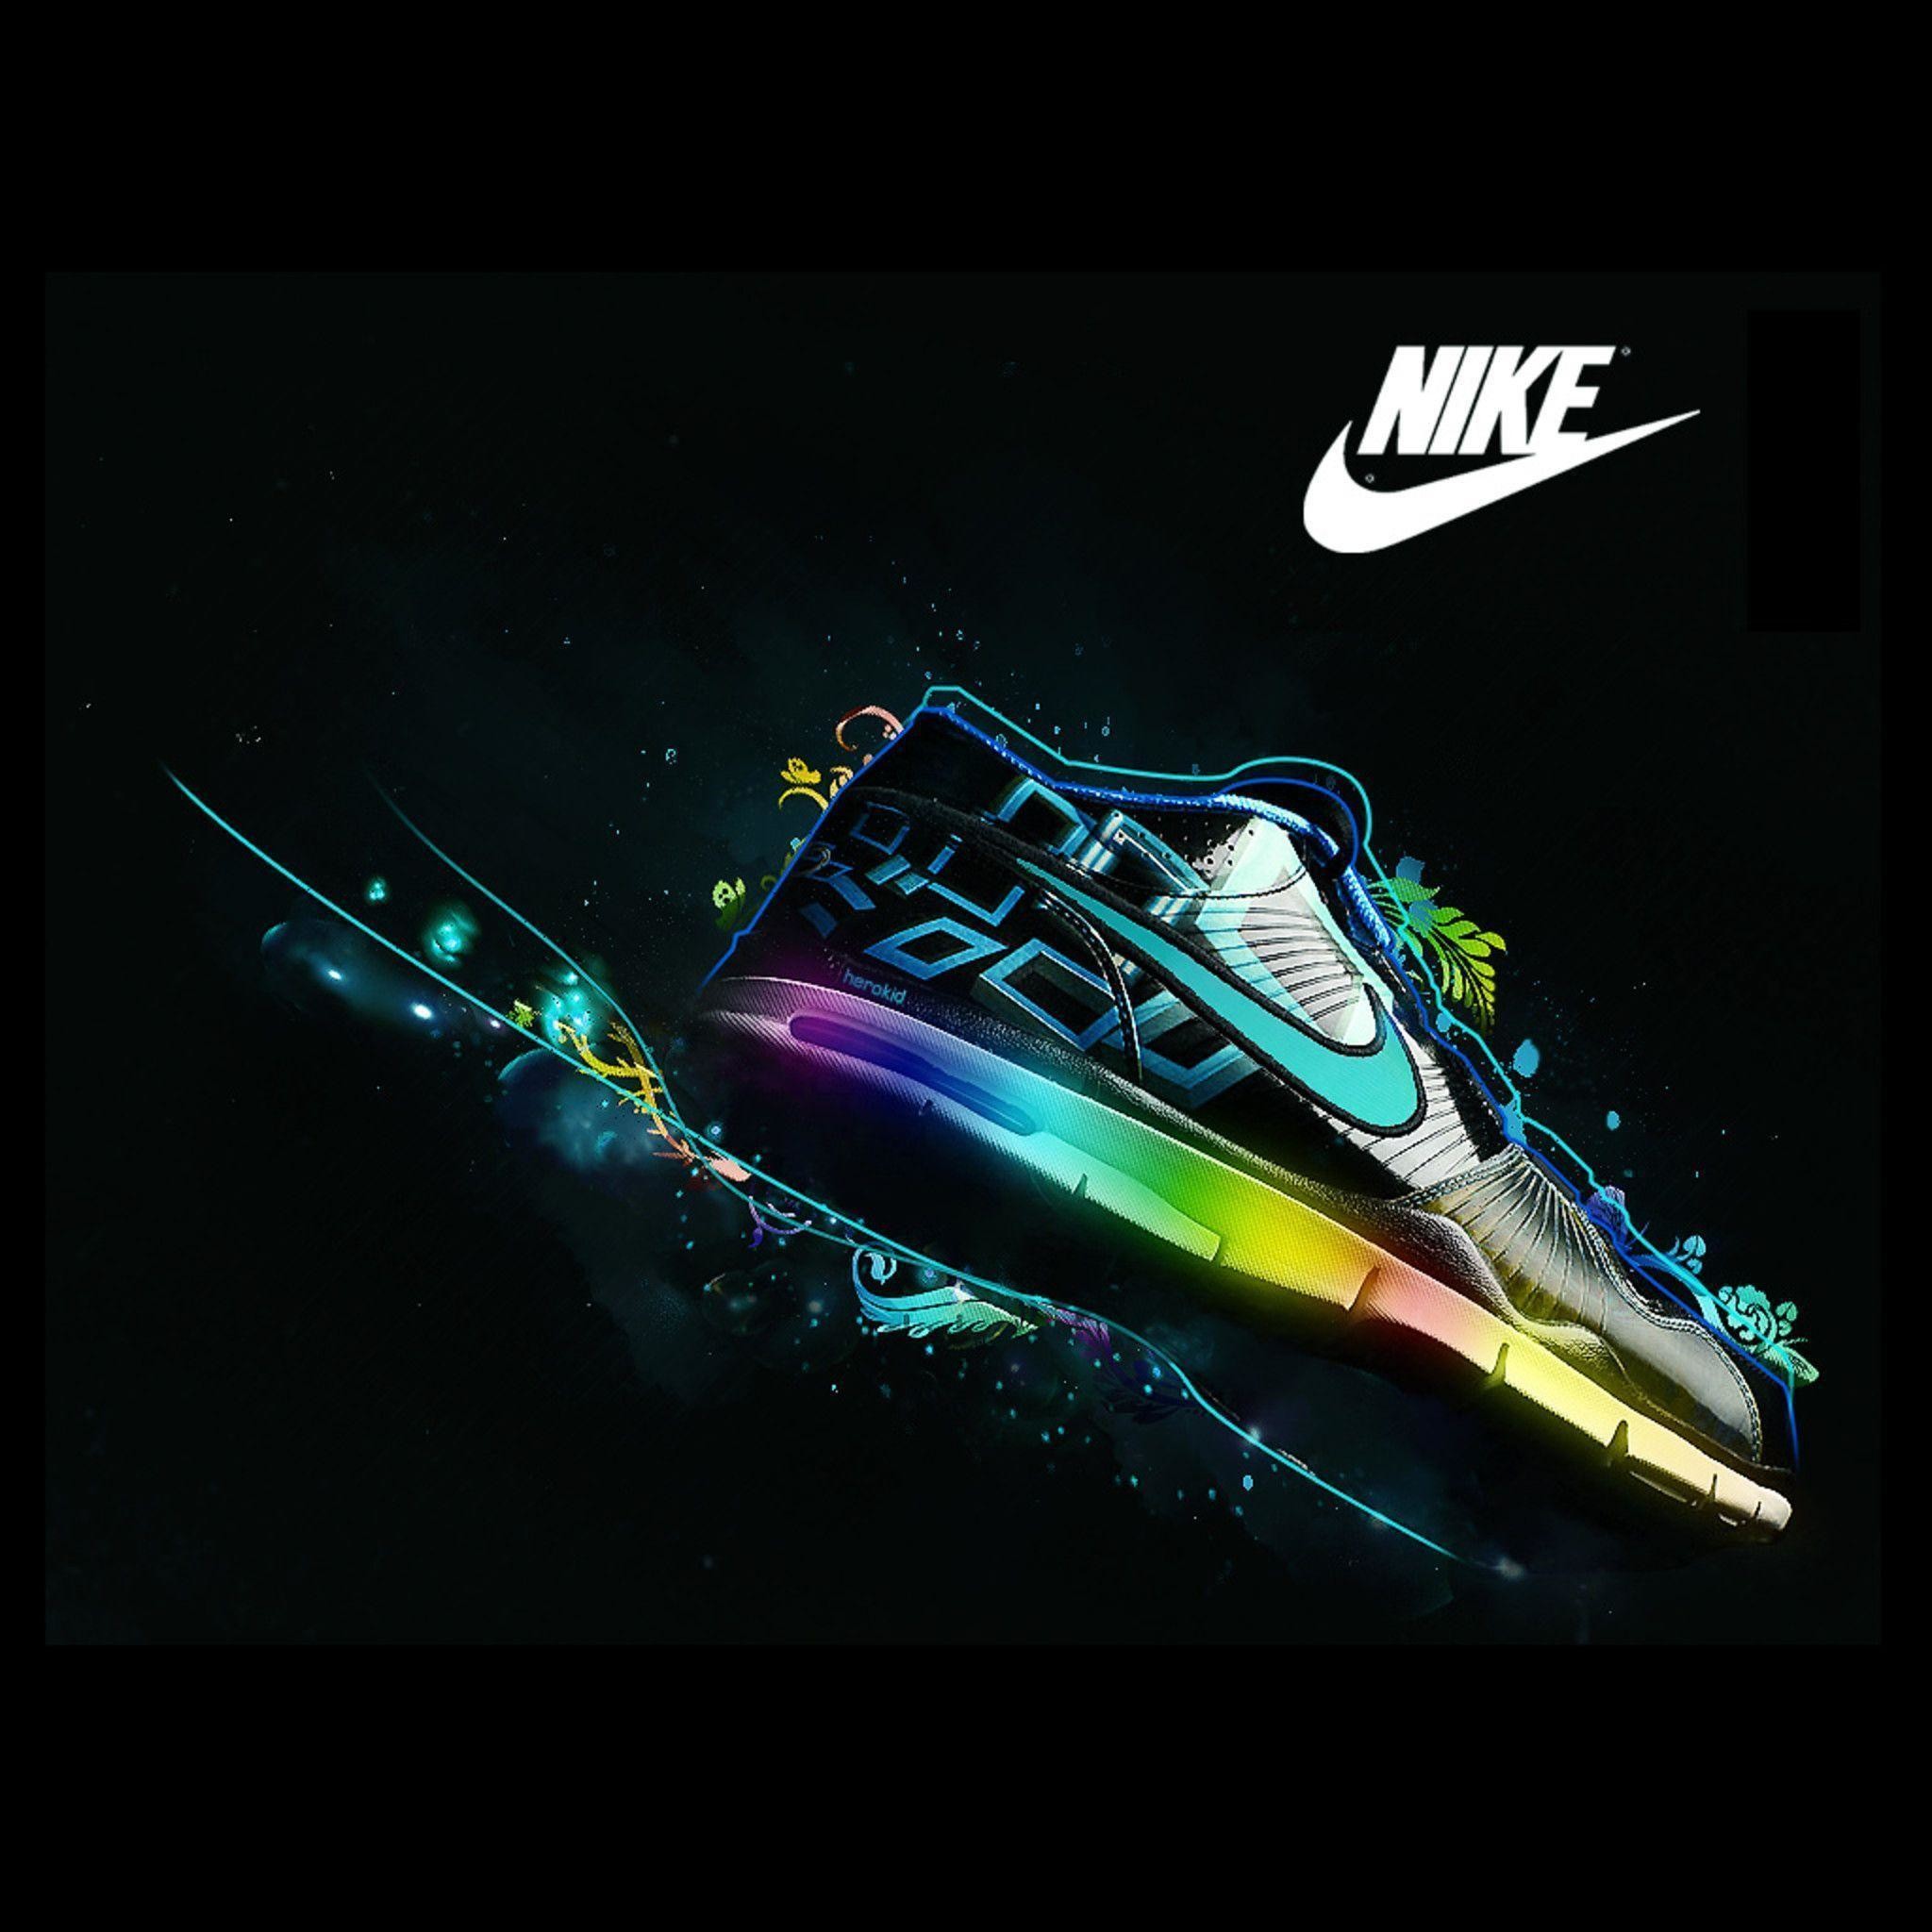 2048x2048 Wallpapers For > Nike Shoes Wallpaper Hd